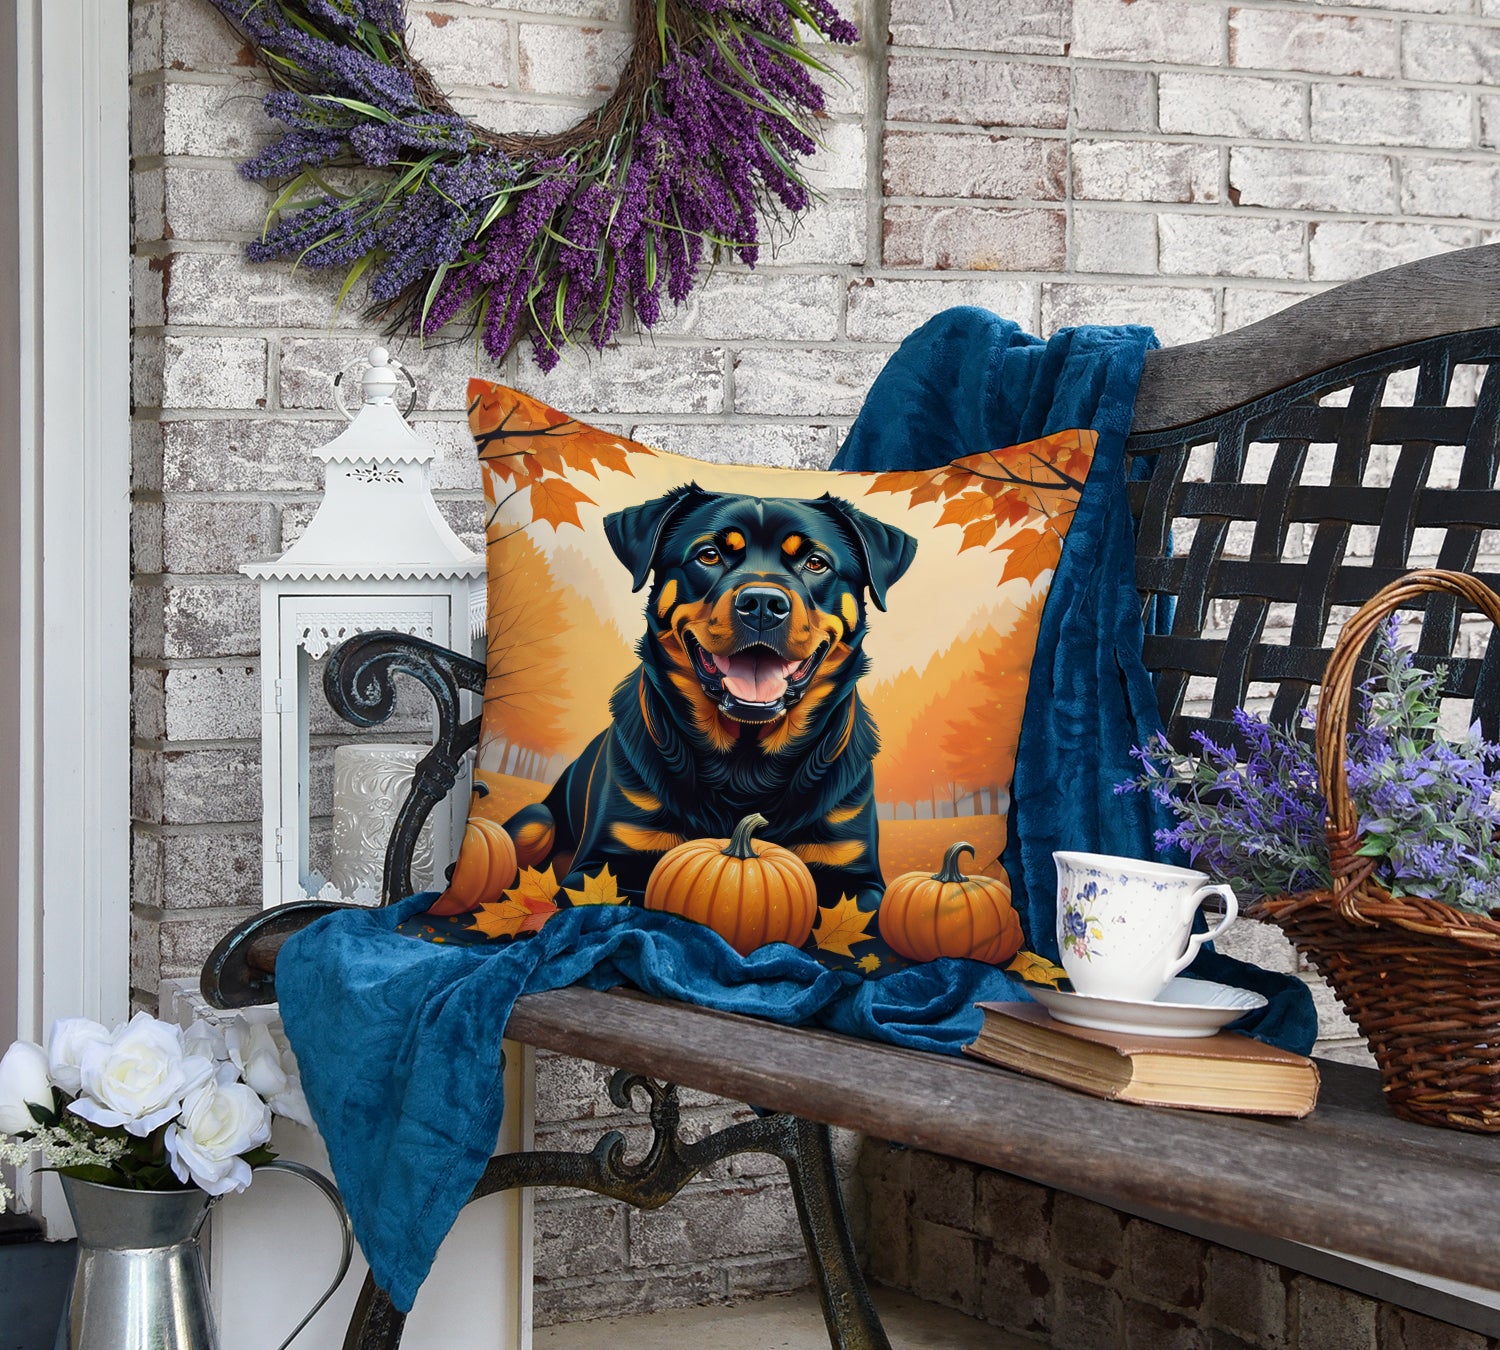 Buy this Rottweiler Fall Fabric Decorative Pillow